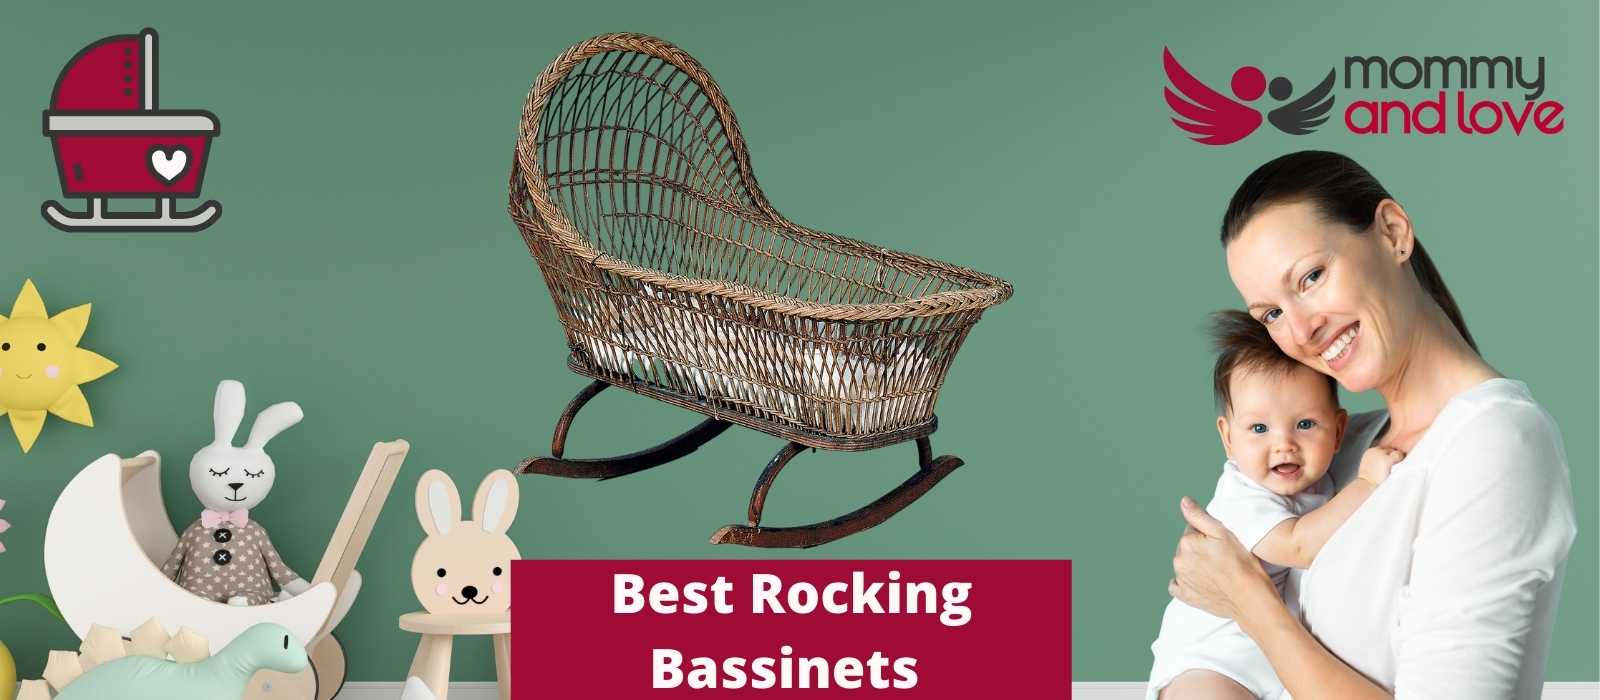 Best Rocking Bassinets For Safety And Budget